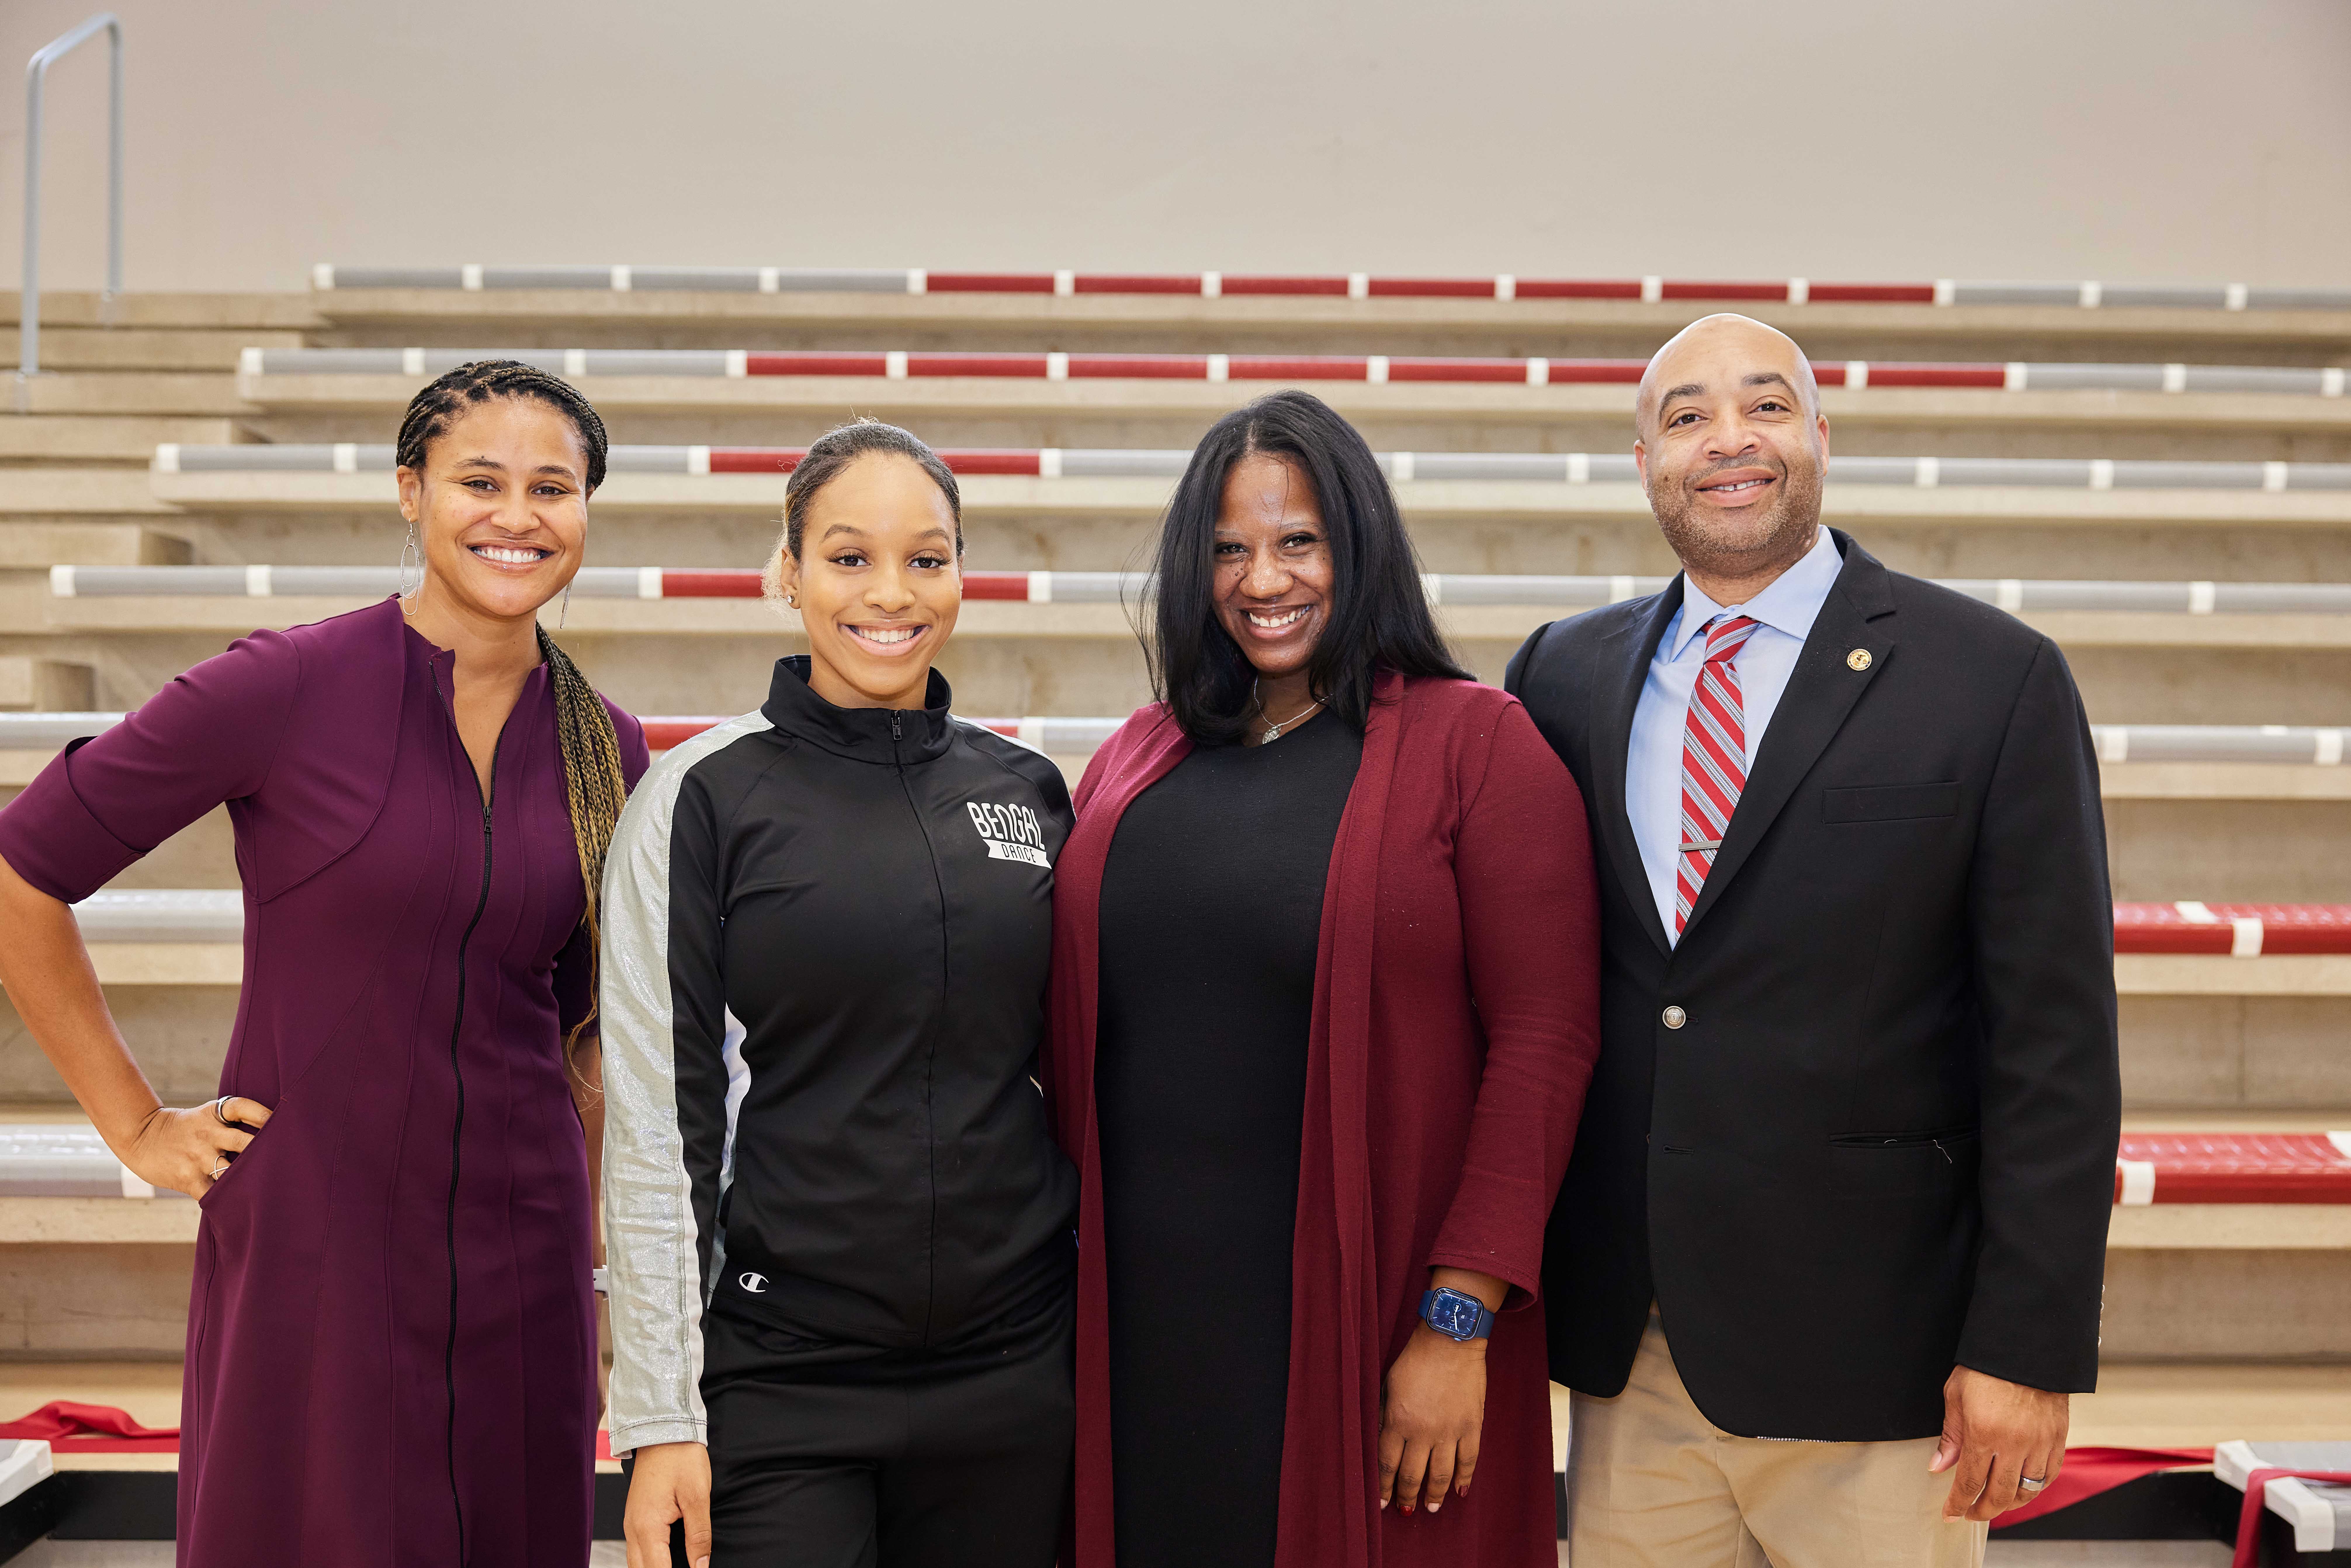 This is a group photo of all the speakers for Hansberry College Prep's gym ribbon-cutting ceremony. They are smiling and standing in front of the new bleachers.